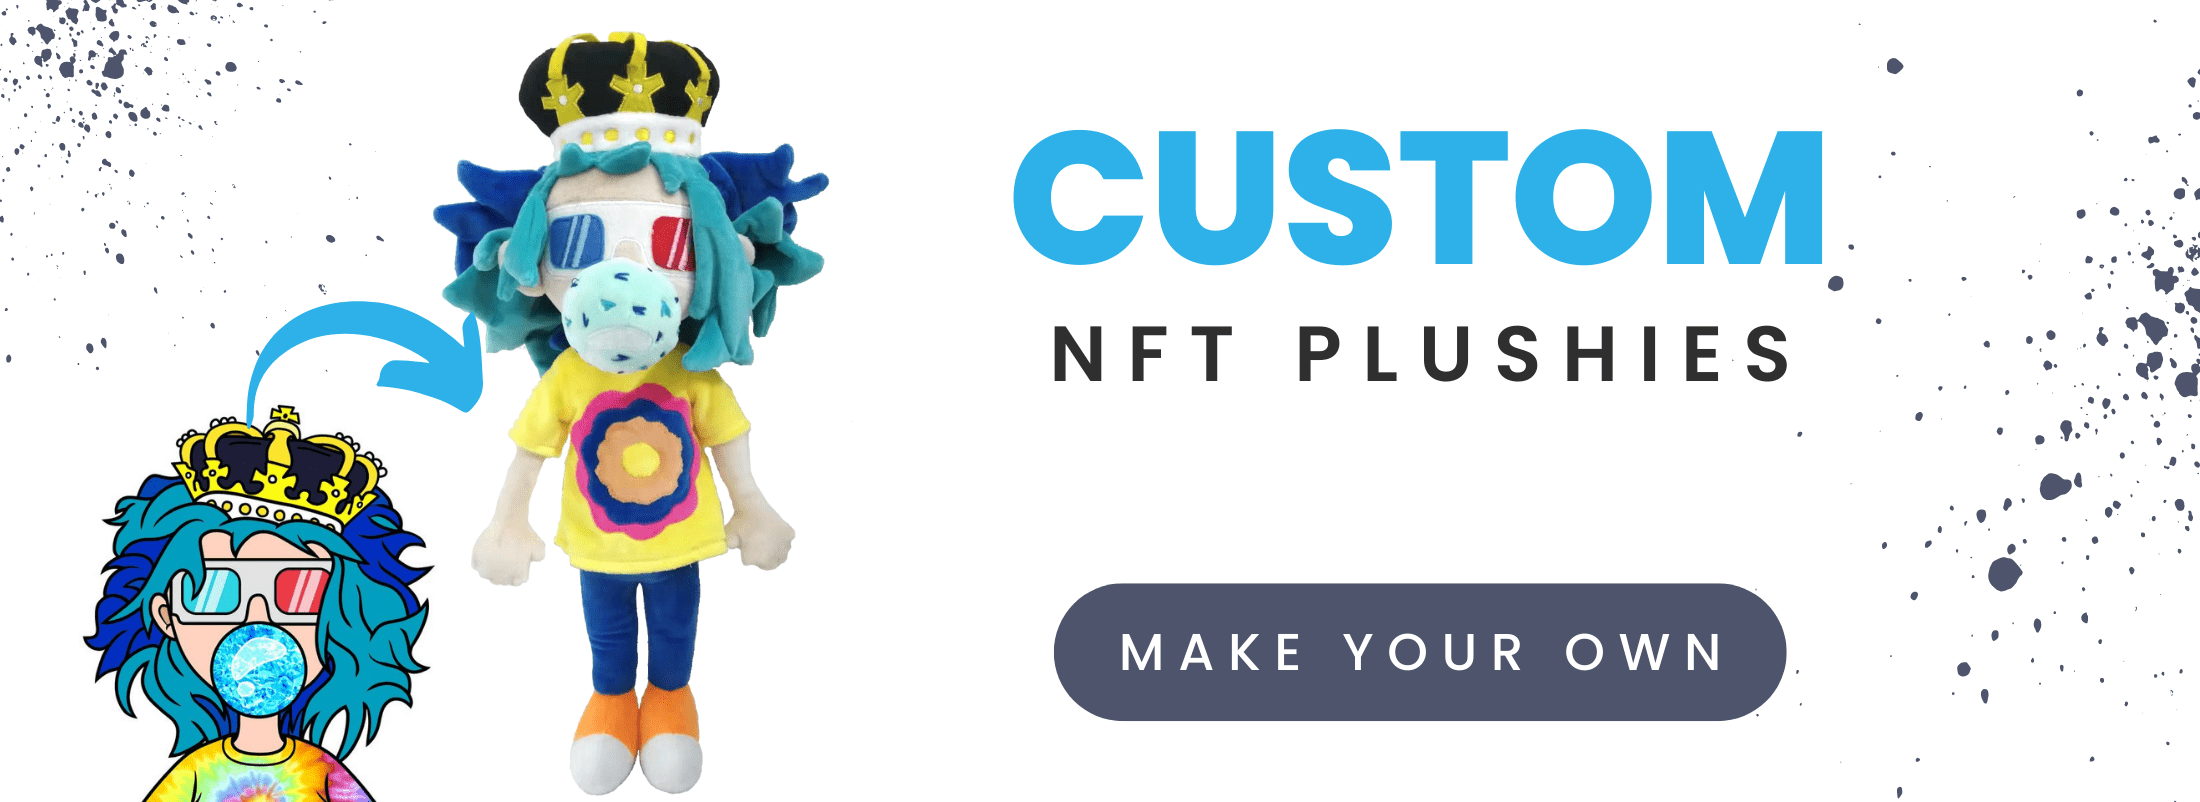 NFT plushies with NFC chips